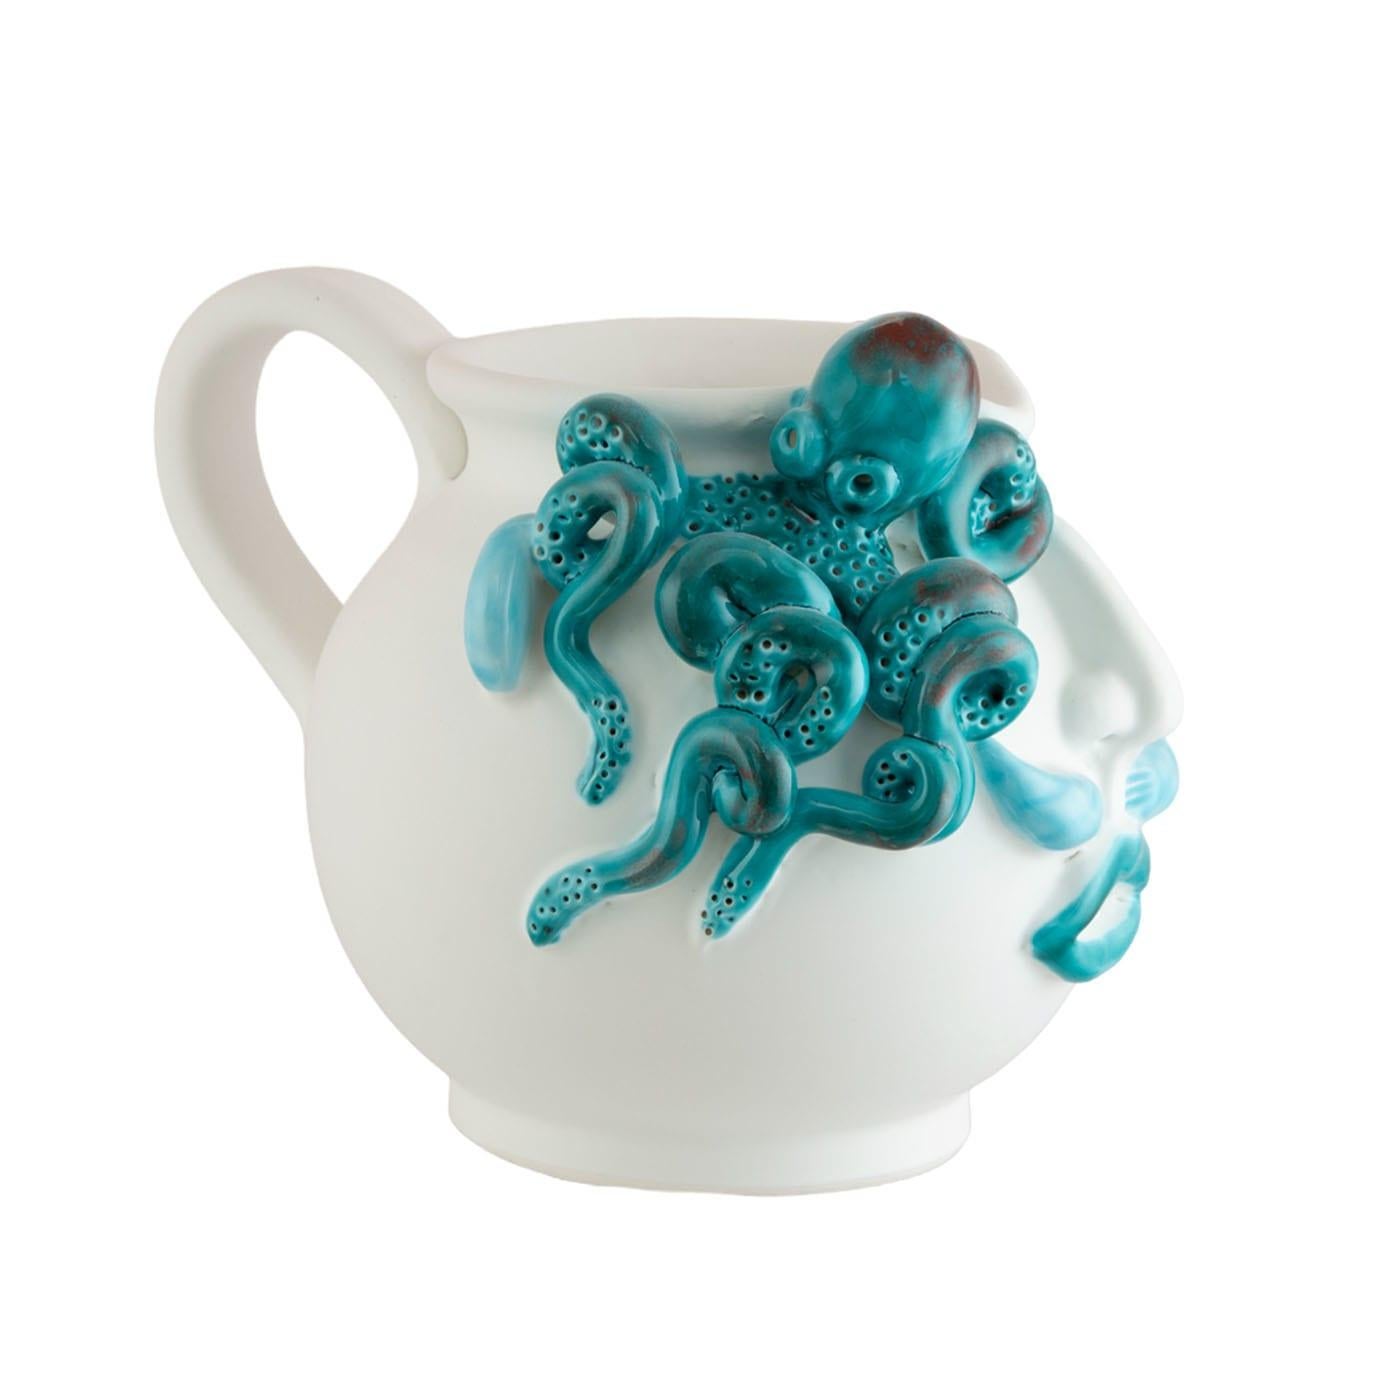 The large jug, adorned with a captivating face and an octopus motif, is meticulously crafted from white clay, finished with a smooth matte white glaze, and accentuated by vibrant blue, green, and red-colored crystals. This figurative masterpiece